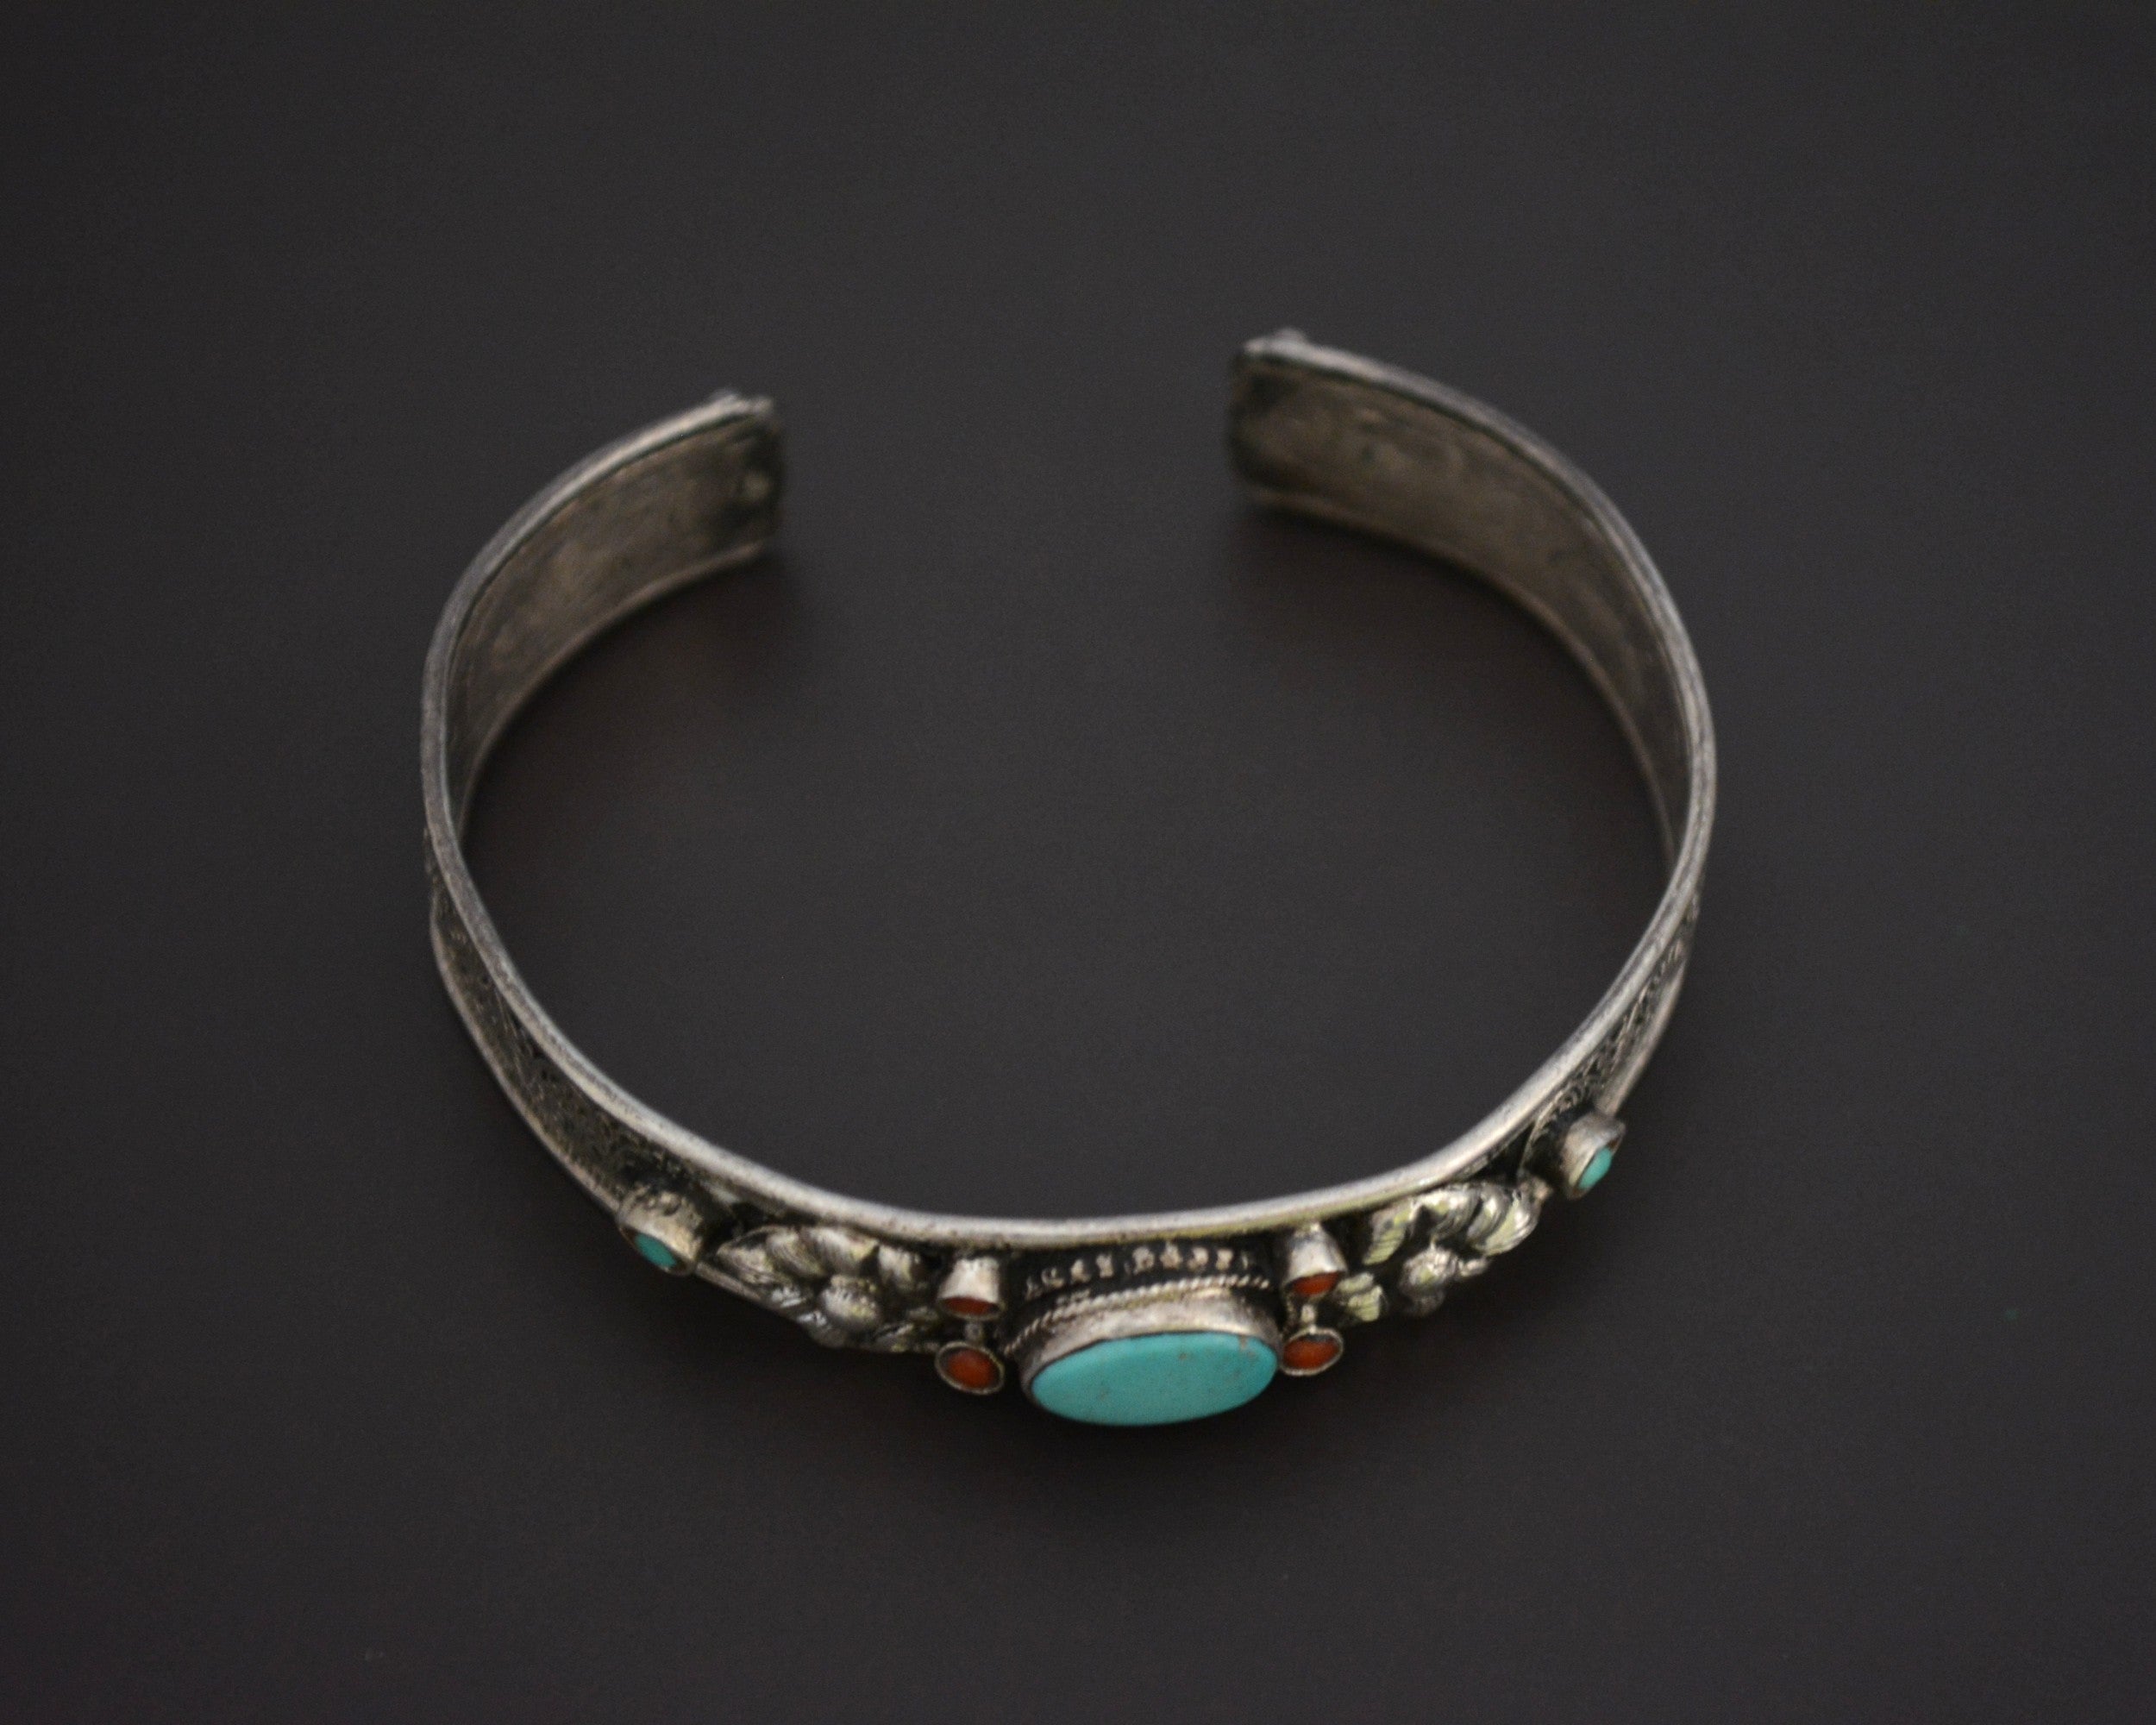 Nepali Turquoise Coral Cuff Bracelet with Filigree Work - SMALL